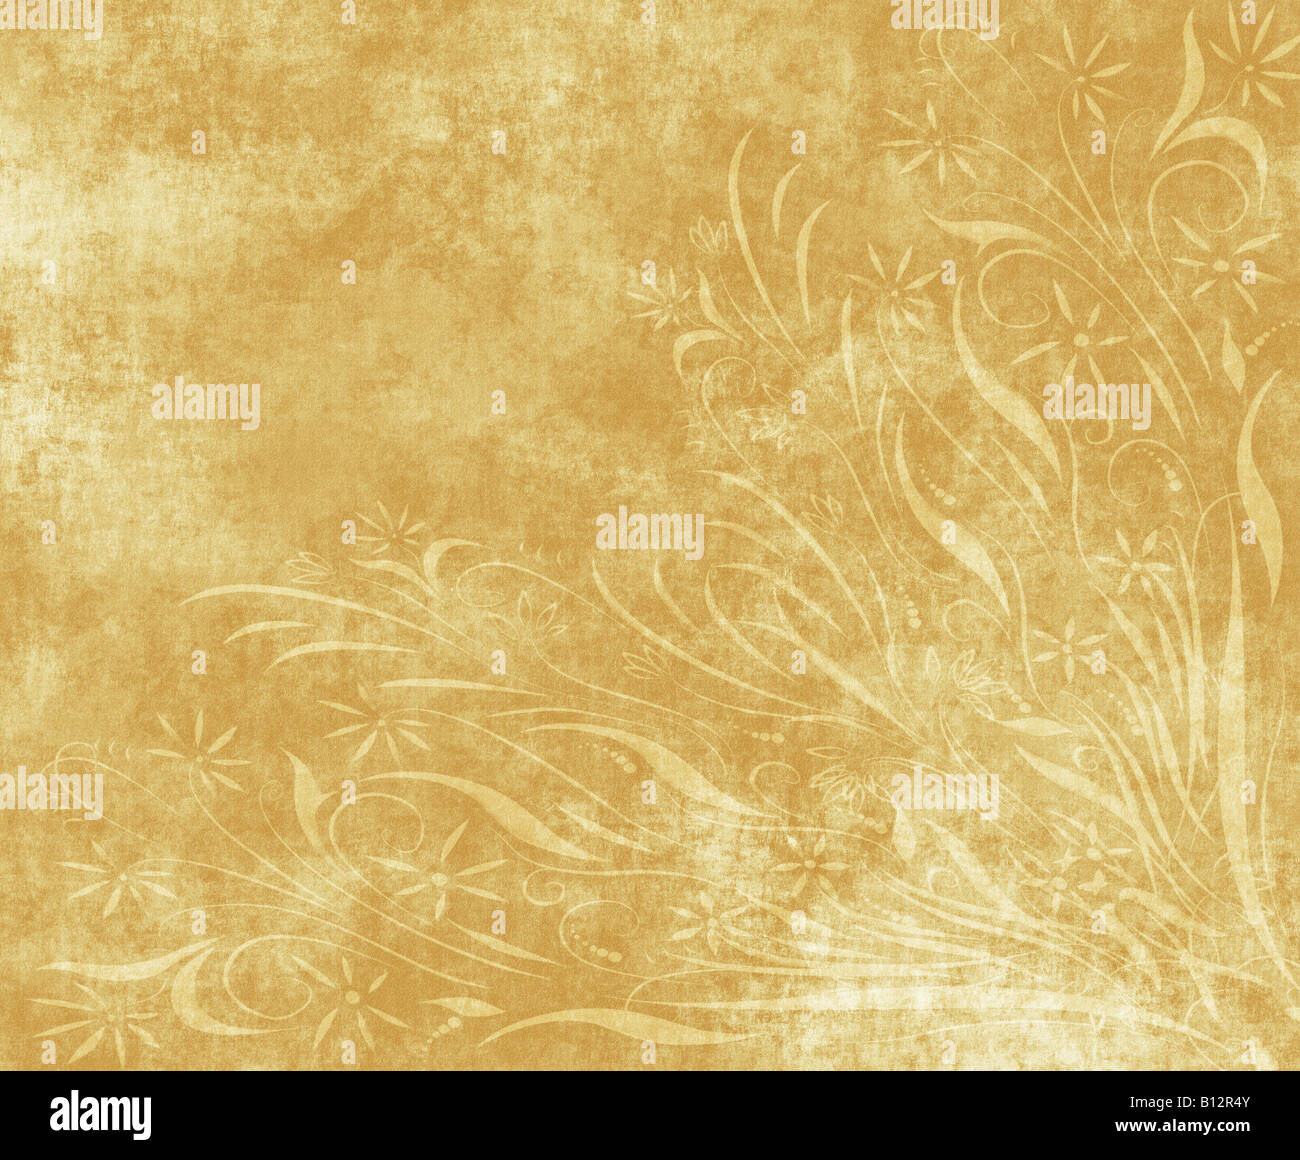 https://c8.alamy.com/comp/B12R4Y/large-old-paper-or-parchment-background-texture-with-floral-design-B12R4Y.jpg